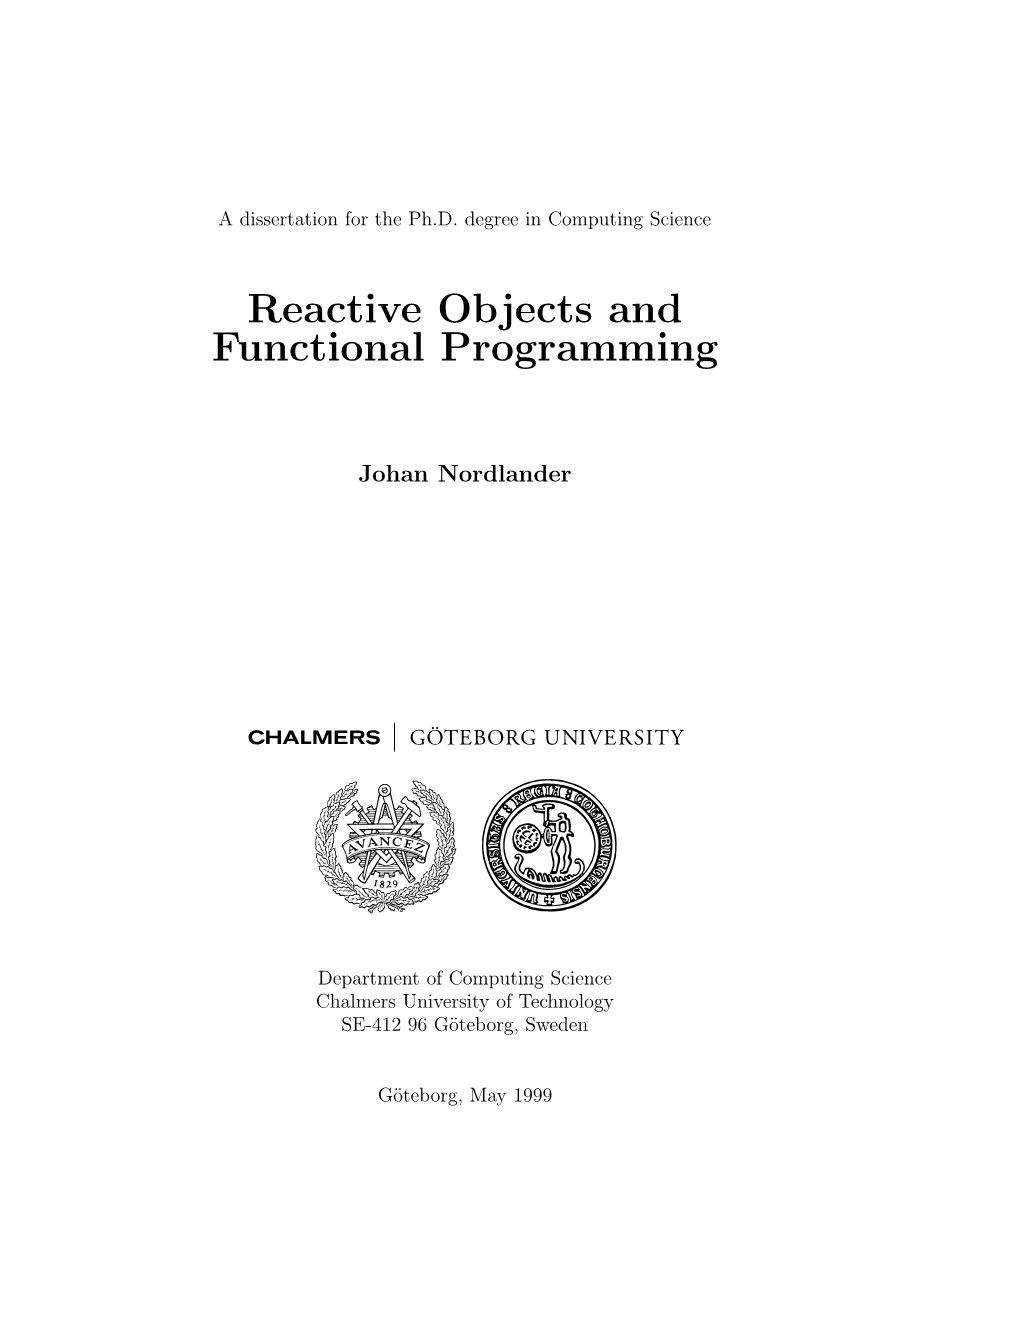 Reactive Objects and Functional Programming